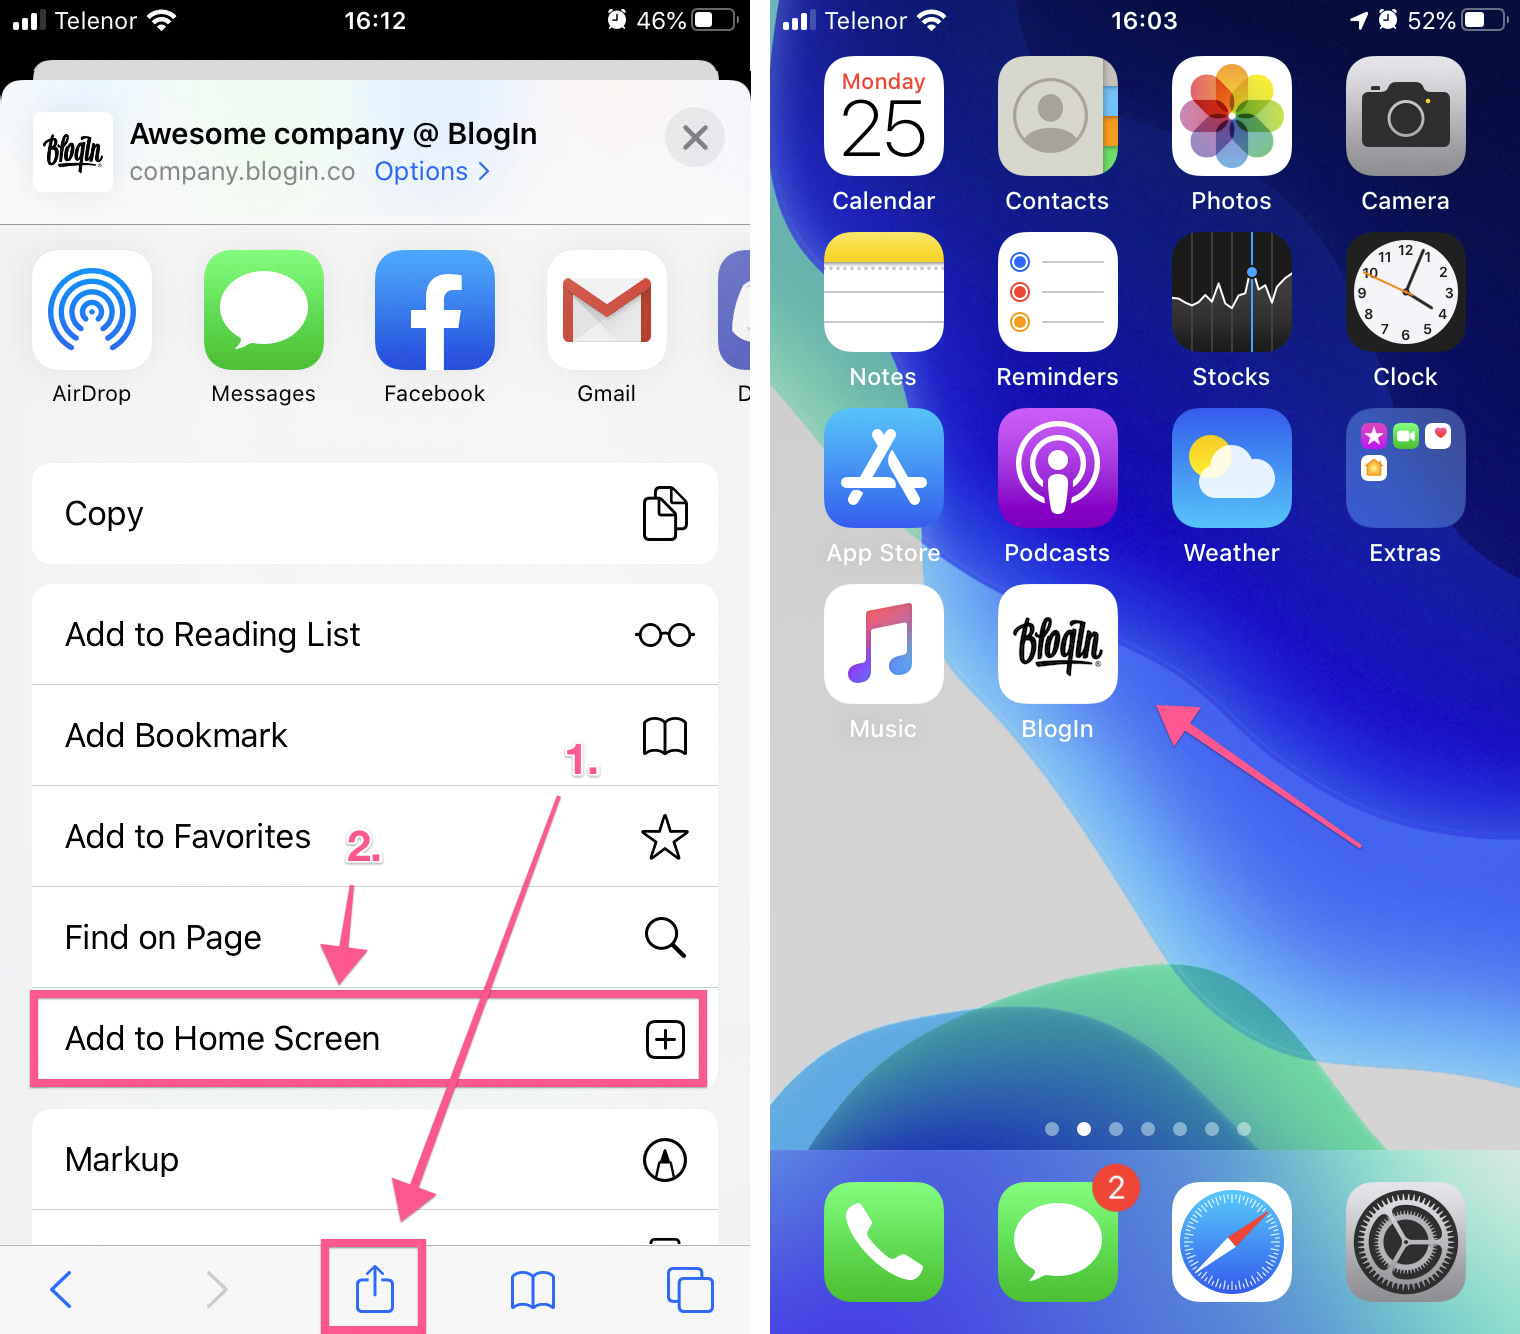 How To Add And Save A Website To The Home Screen On Your IPad